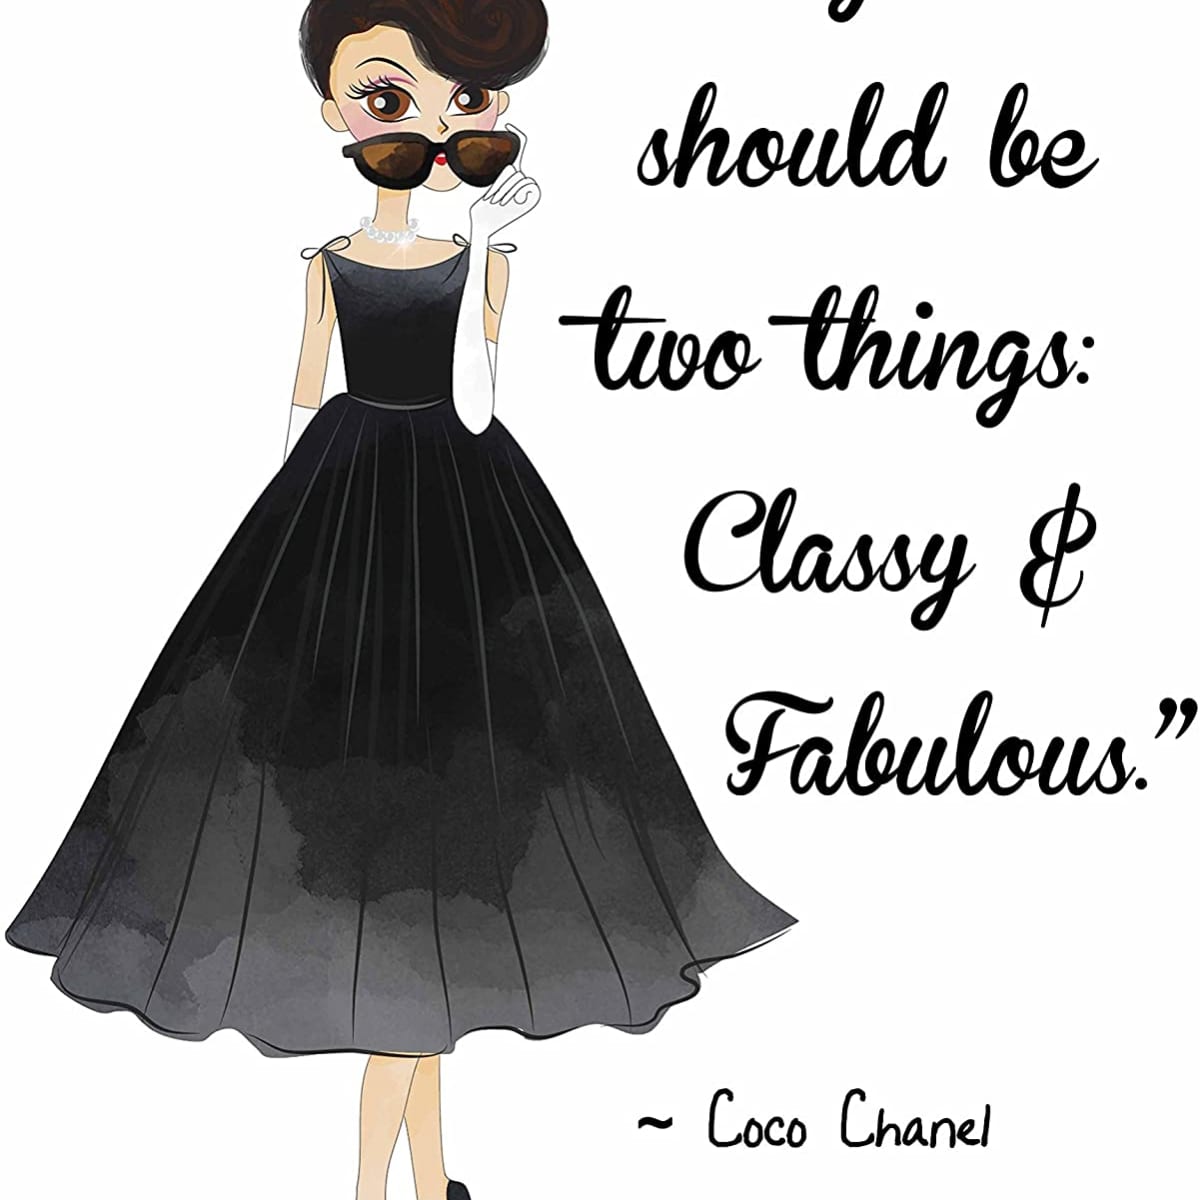 Coco Chanel: An Orphan From Rags to Riches - HubPages